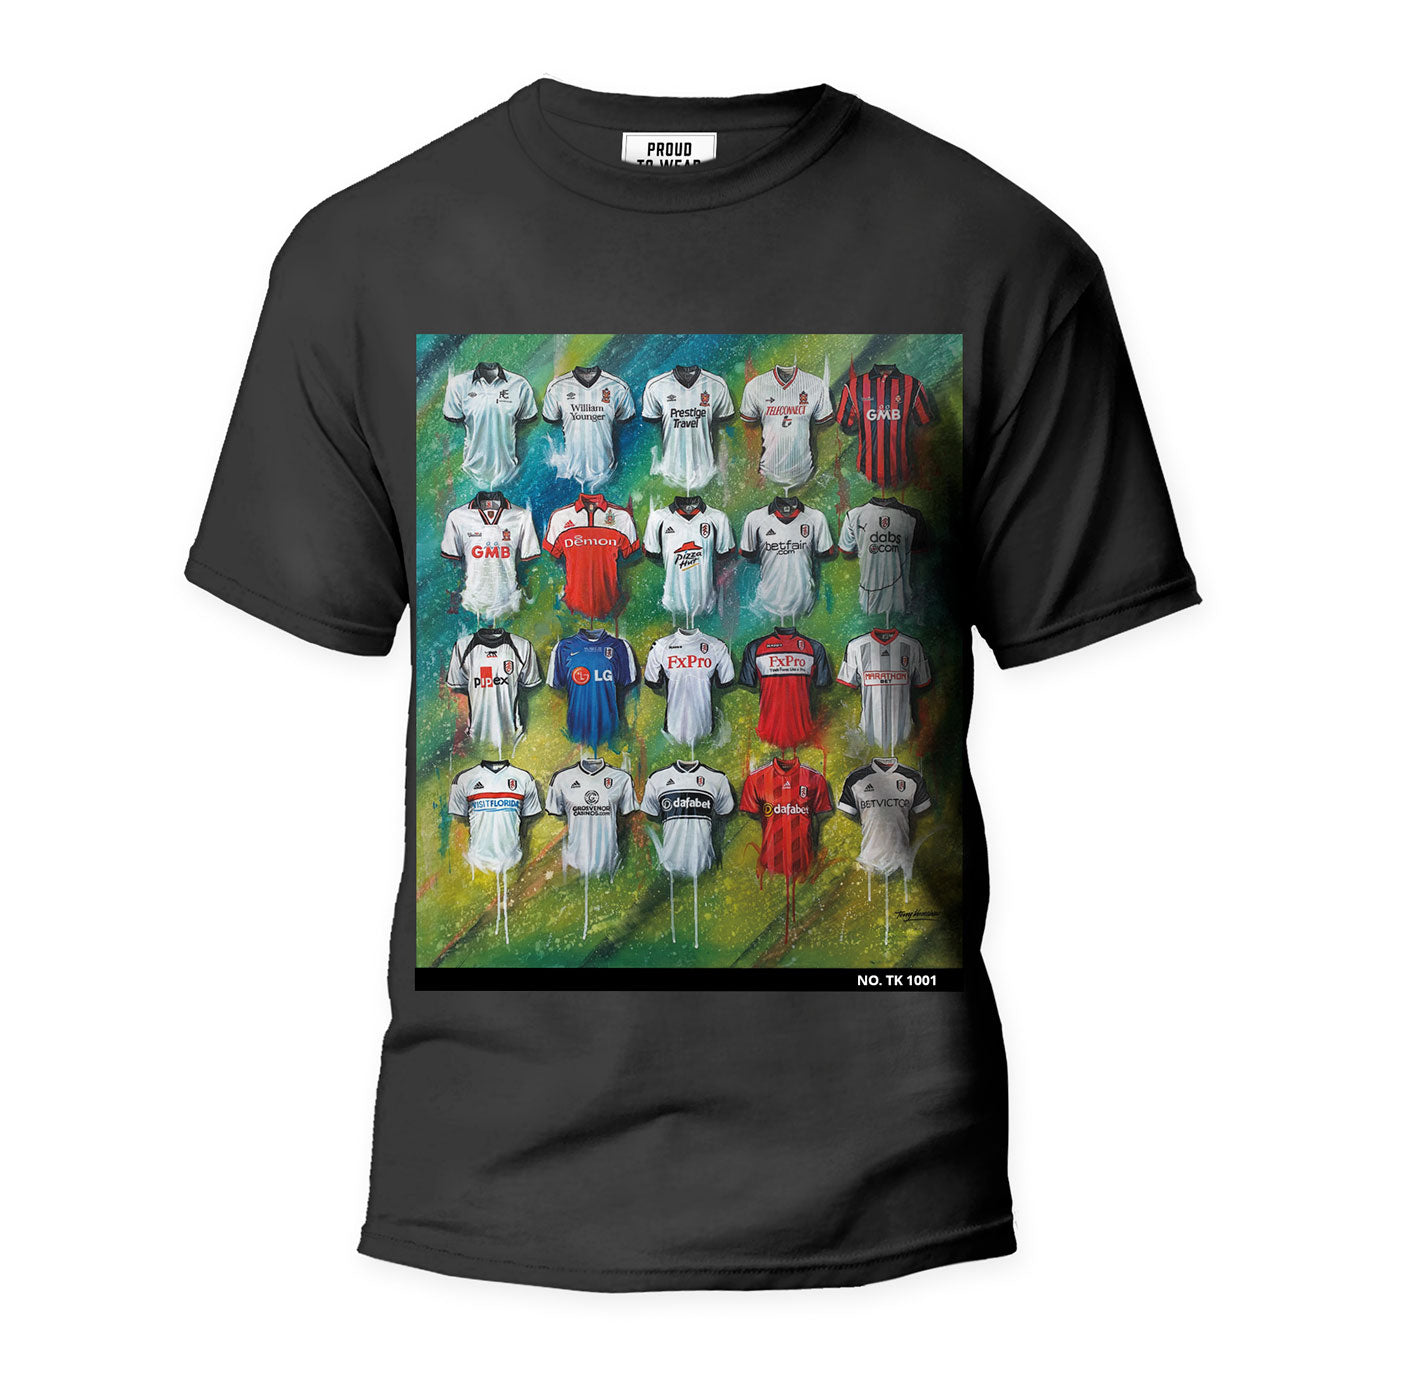 These Fulham T-shirts from Terry Kneeshaw feature his unique artwork for the team, with each shirt being individually numbered and available in sizes ranging from xxs to xxxl. You can choose from either a black or white shirt. The designs are perfect for fans of Fulham and football in general, with the artwork capturing the spirit and essence of the club. These limited edition shirts are a must-have for any true Fulham supporter.